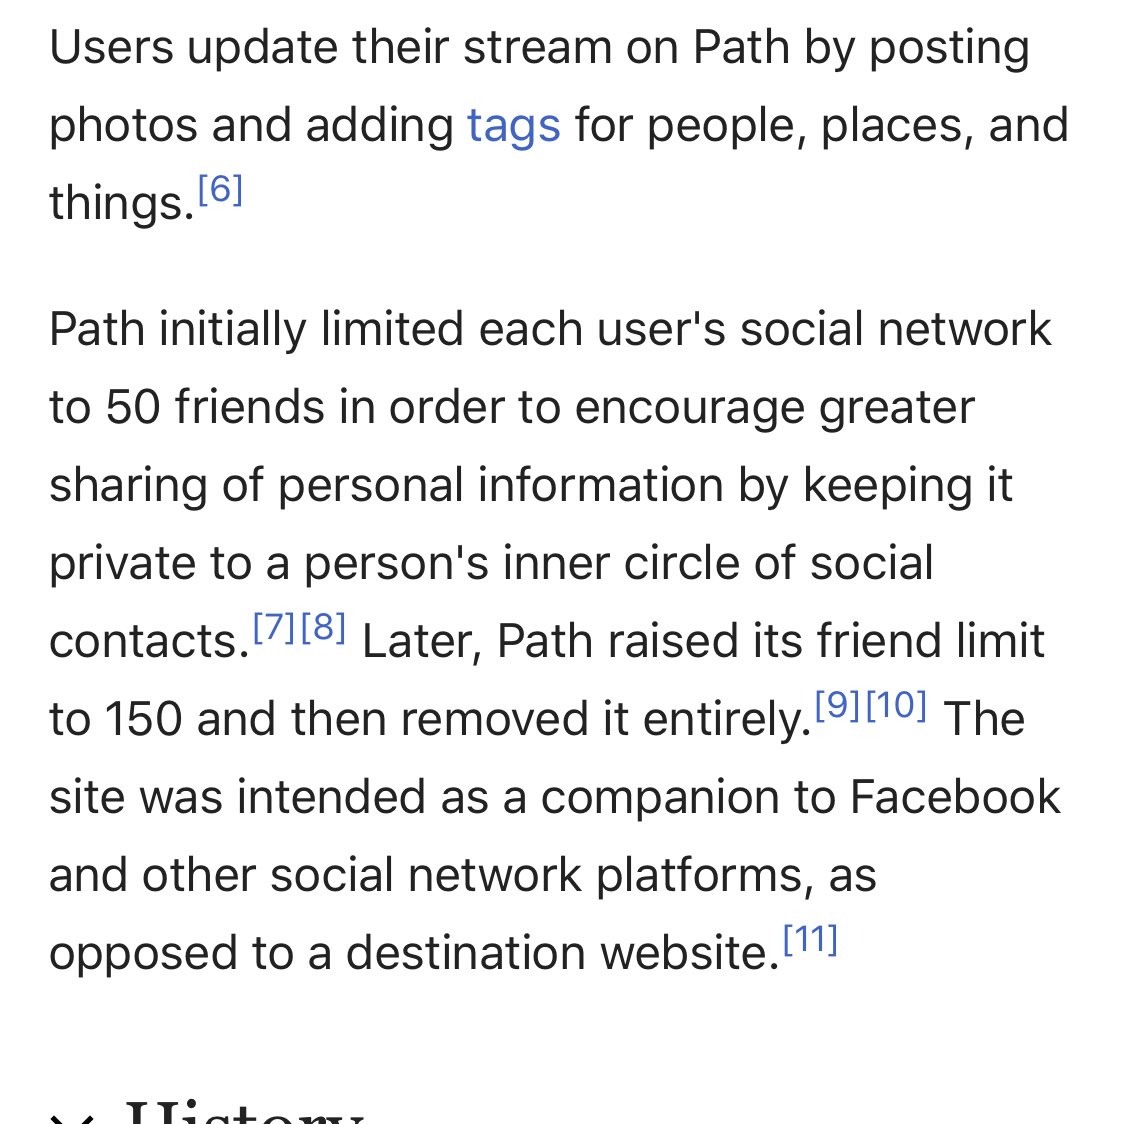 Path for me. It was a social network focused on close friends when social was all broadcasting.It’s irrelevant now. Messaging apps have all that functionality now + its better suited as feature within broader social networks (i.e. IG Close Friends)